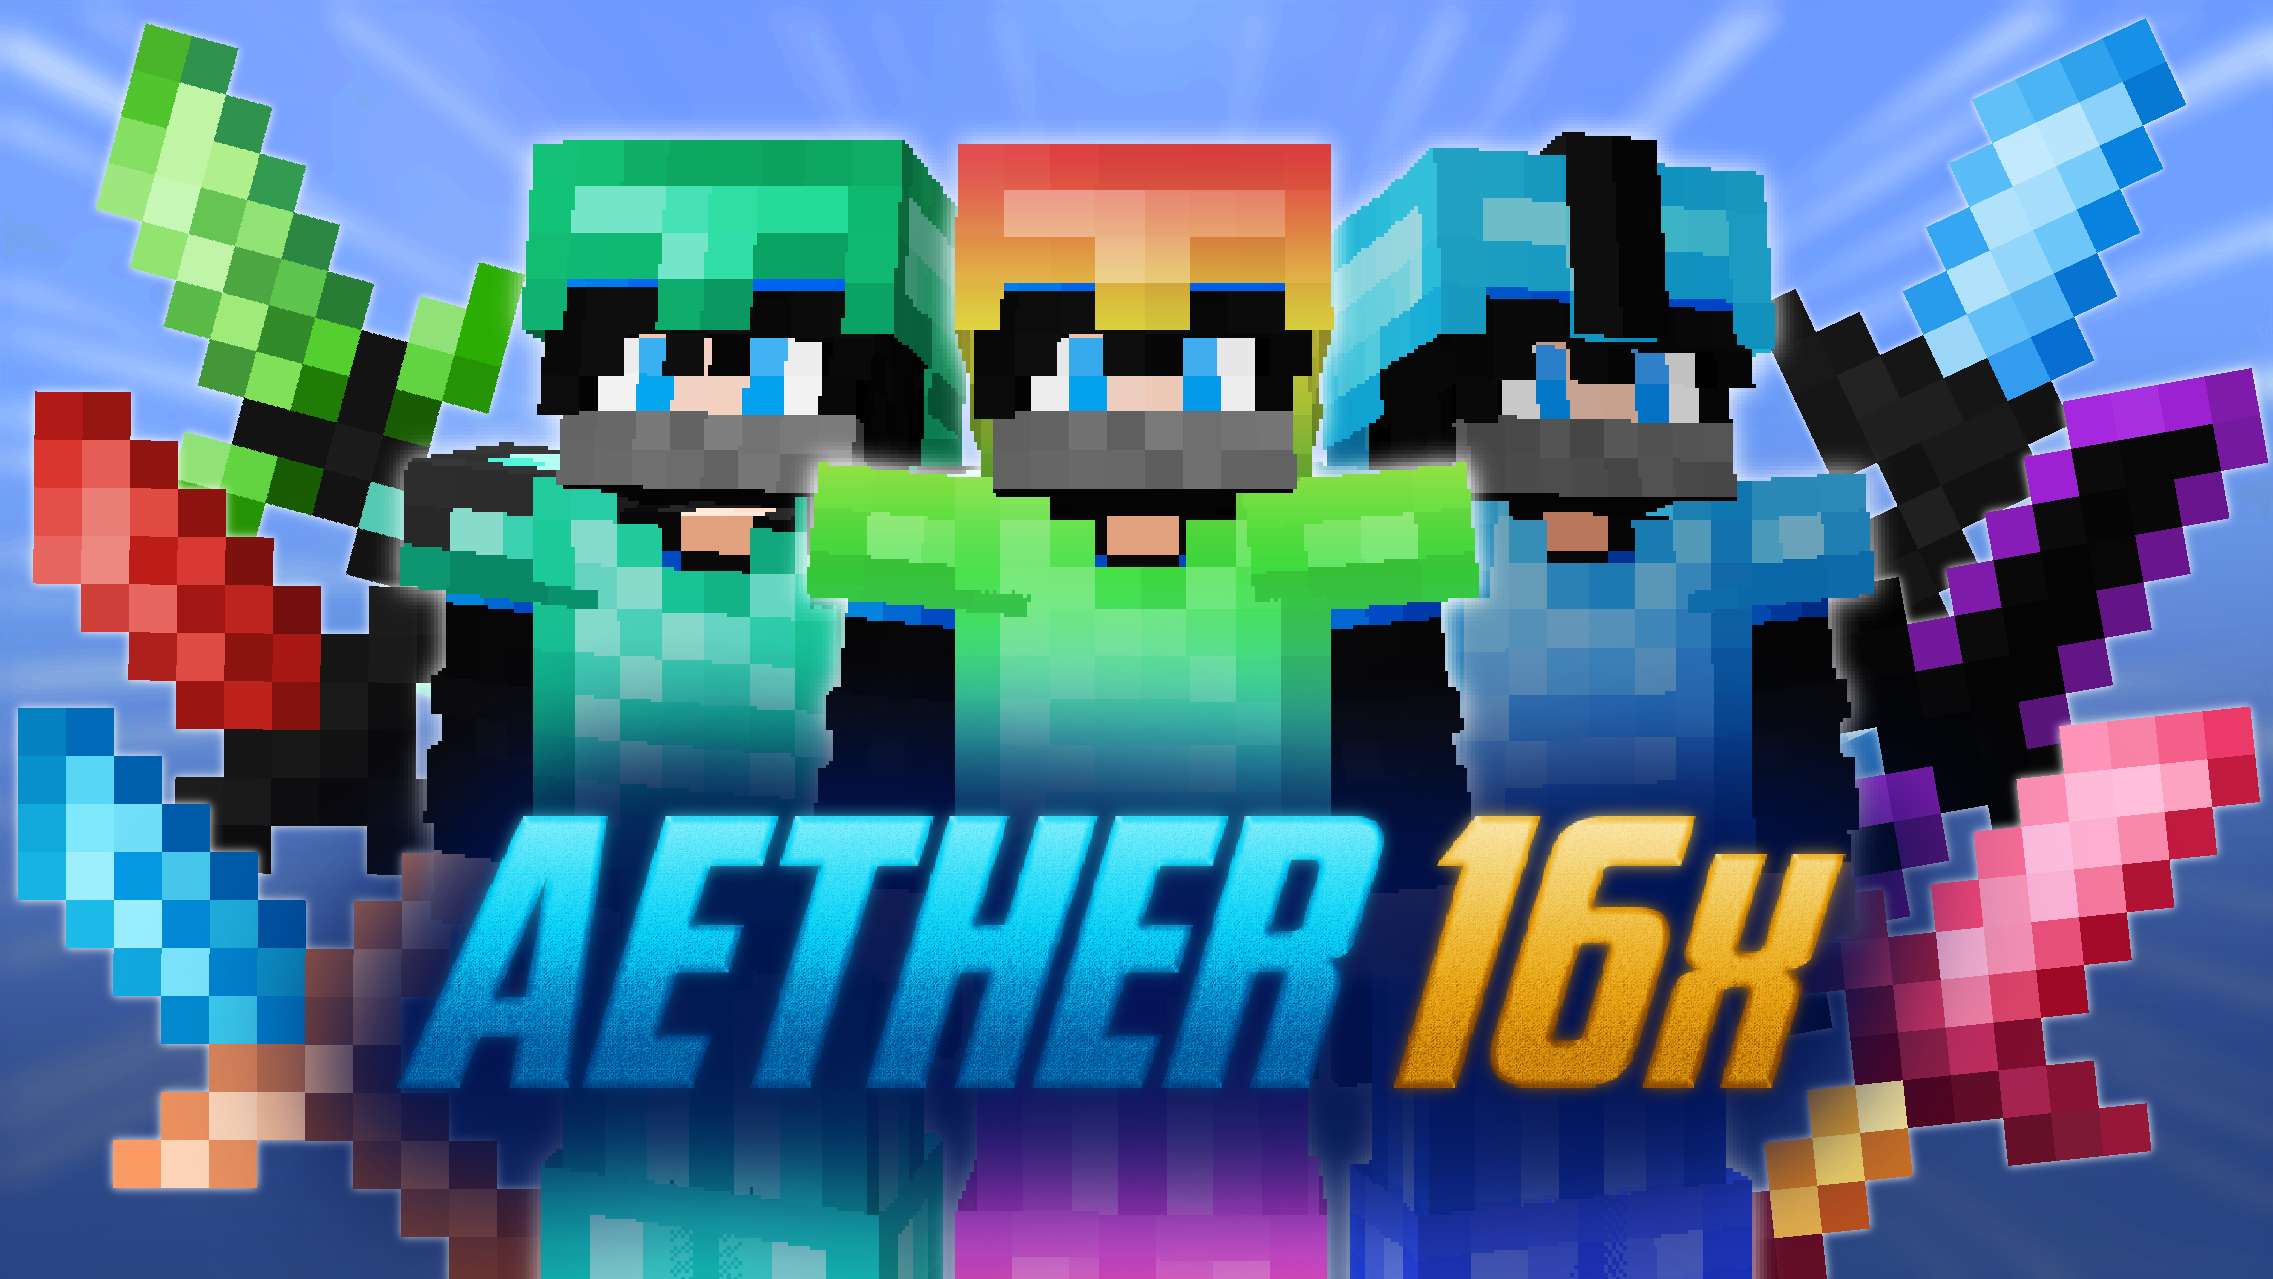 Aether 16x [Jona] 16x by Mqryo on PvPRP